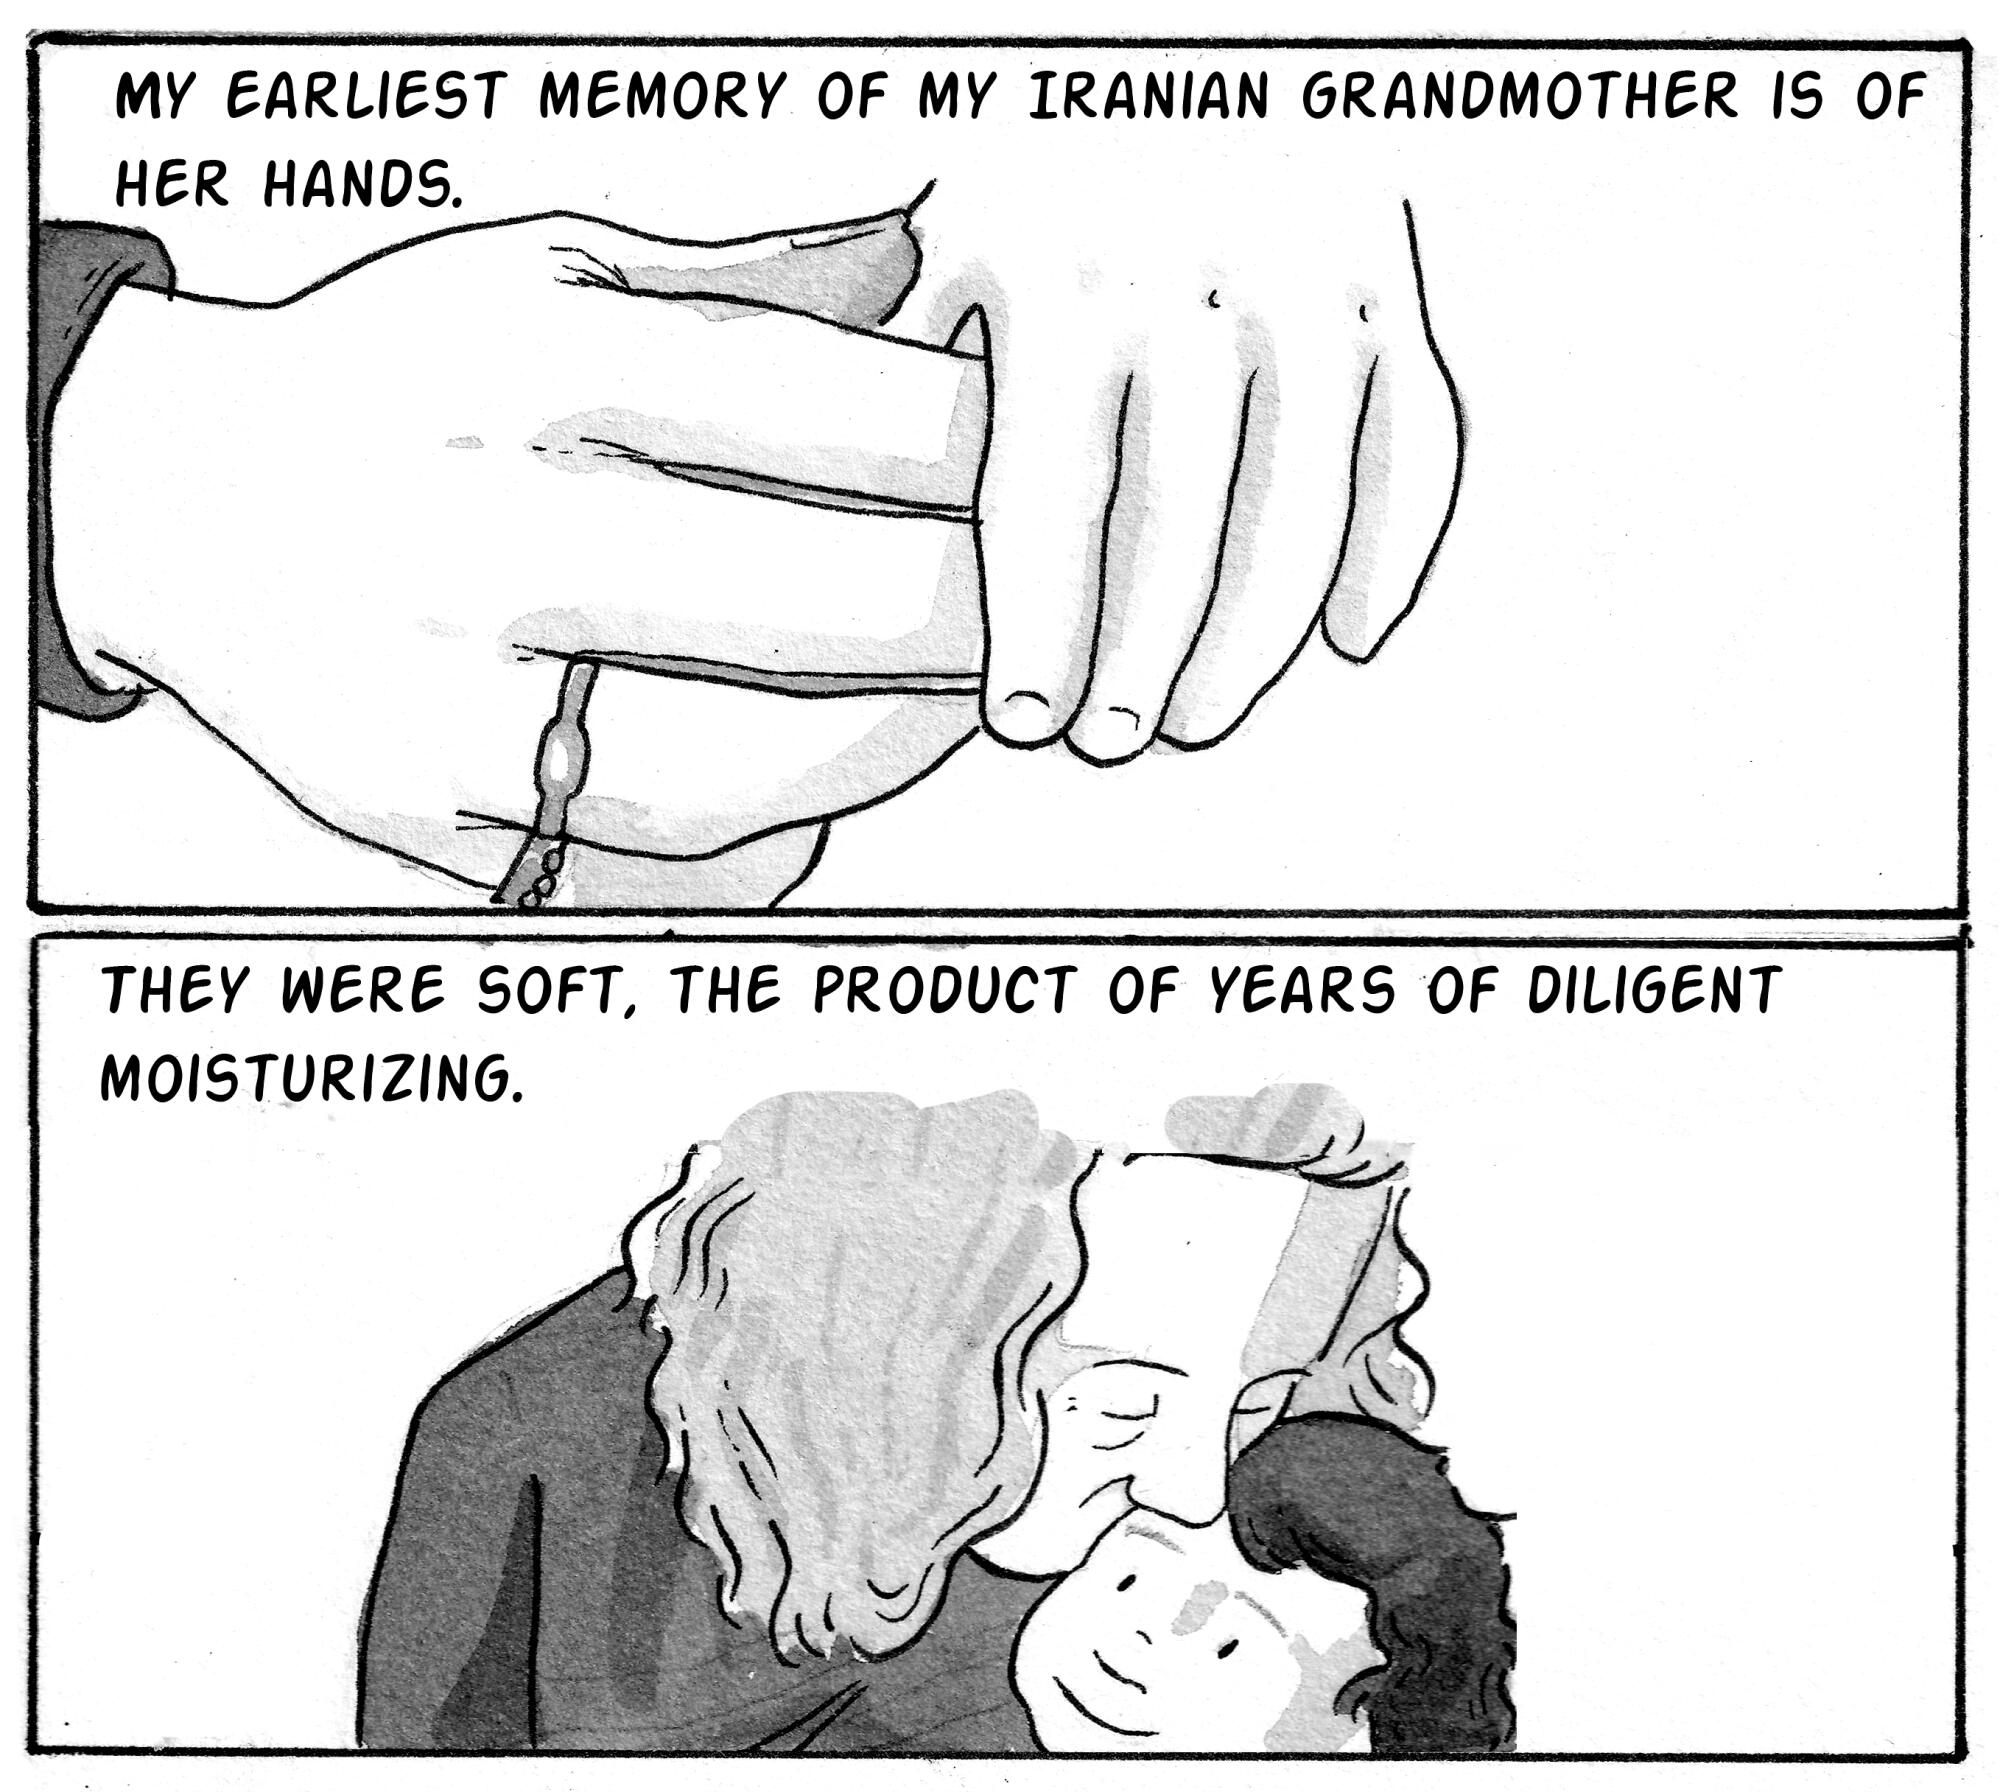 My earliest memory of my Iranian grandmother is of her hands. They were soft, the product of years of diligent moisturizing